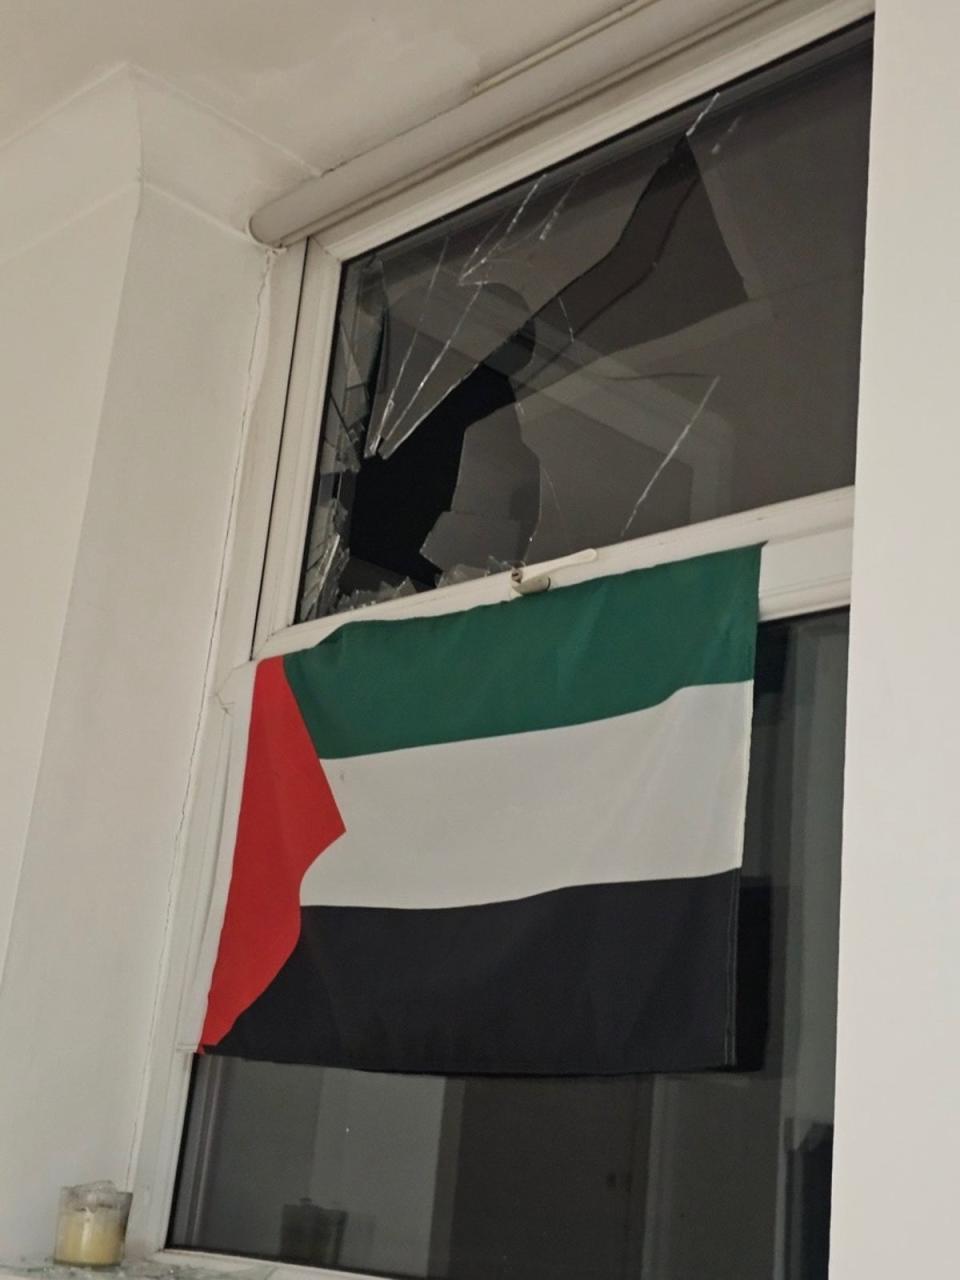 A doctor says he had a rock thrown through the window of his home in Manchester after displaying a Palestinian flag (Supplied)